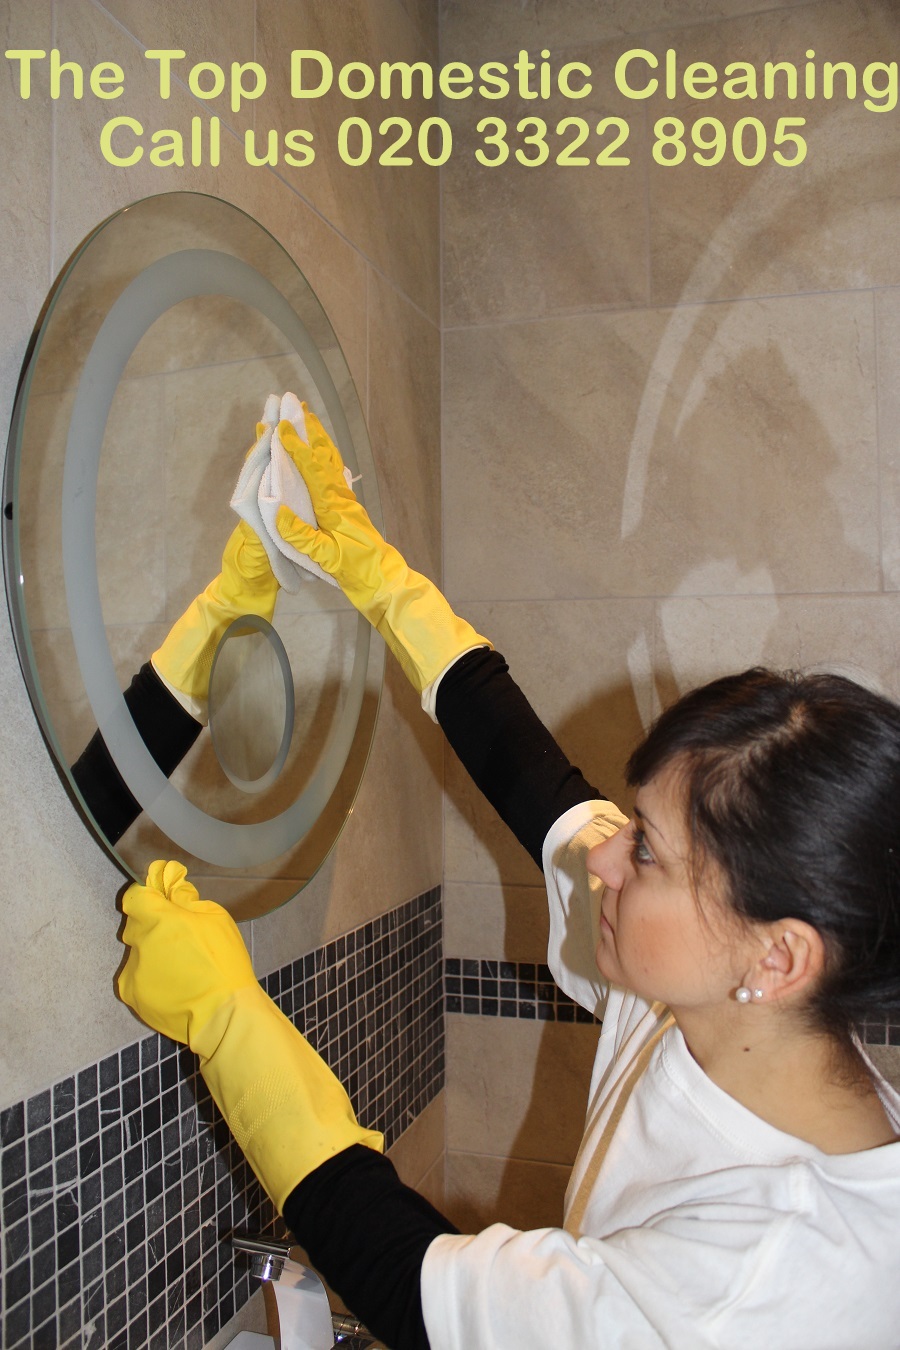 A few of the great things about using Domestic Cleaning London services